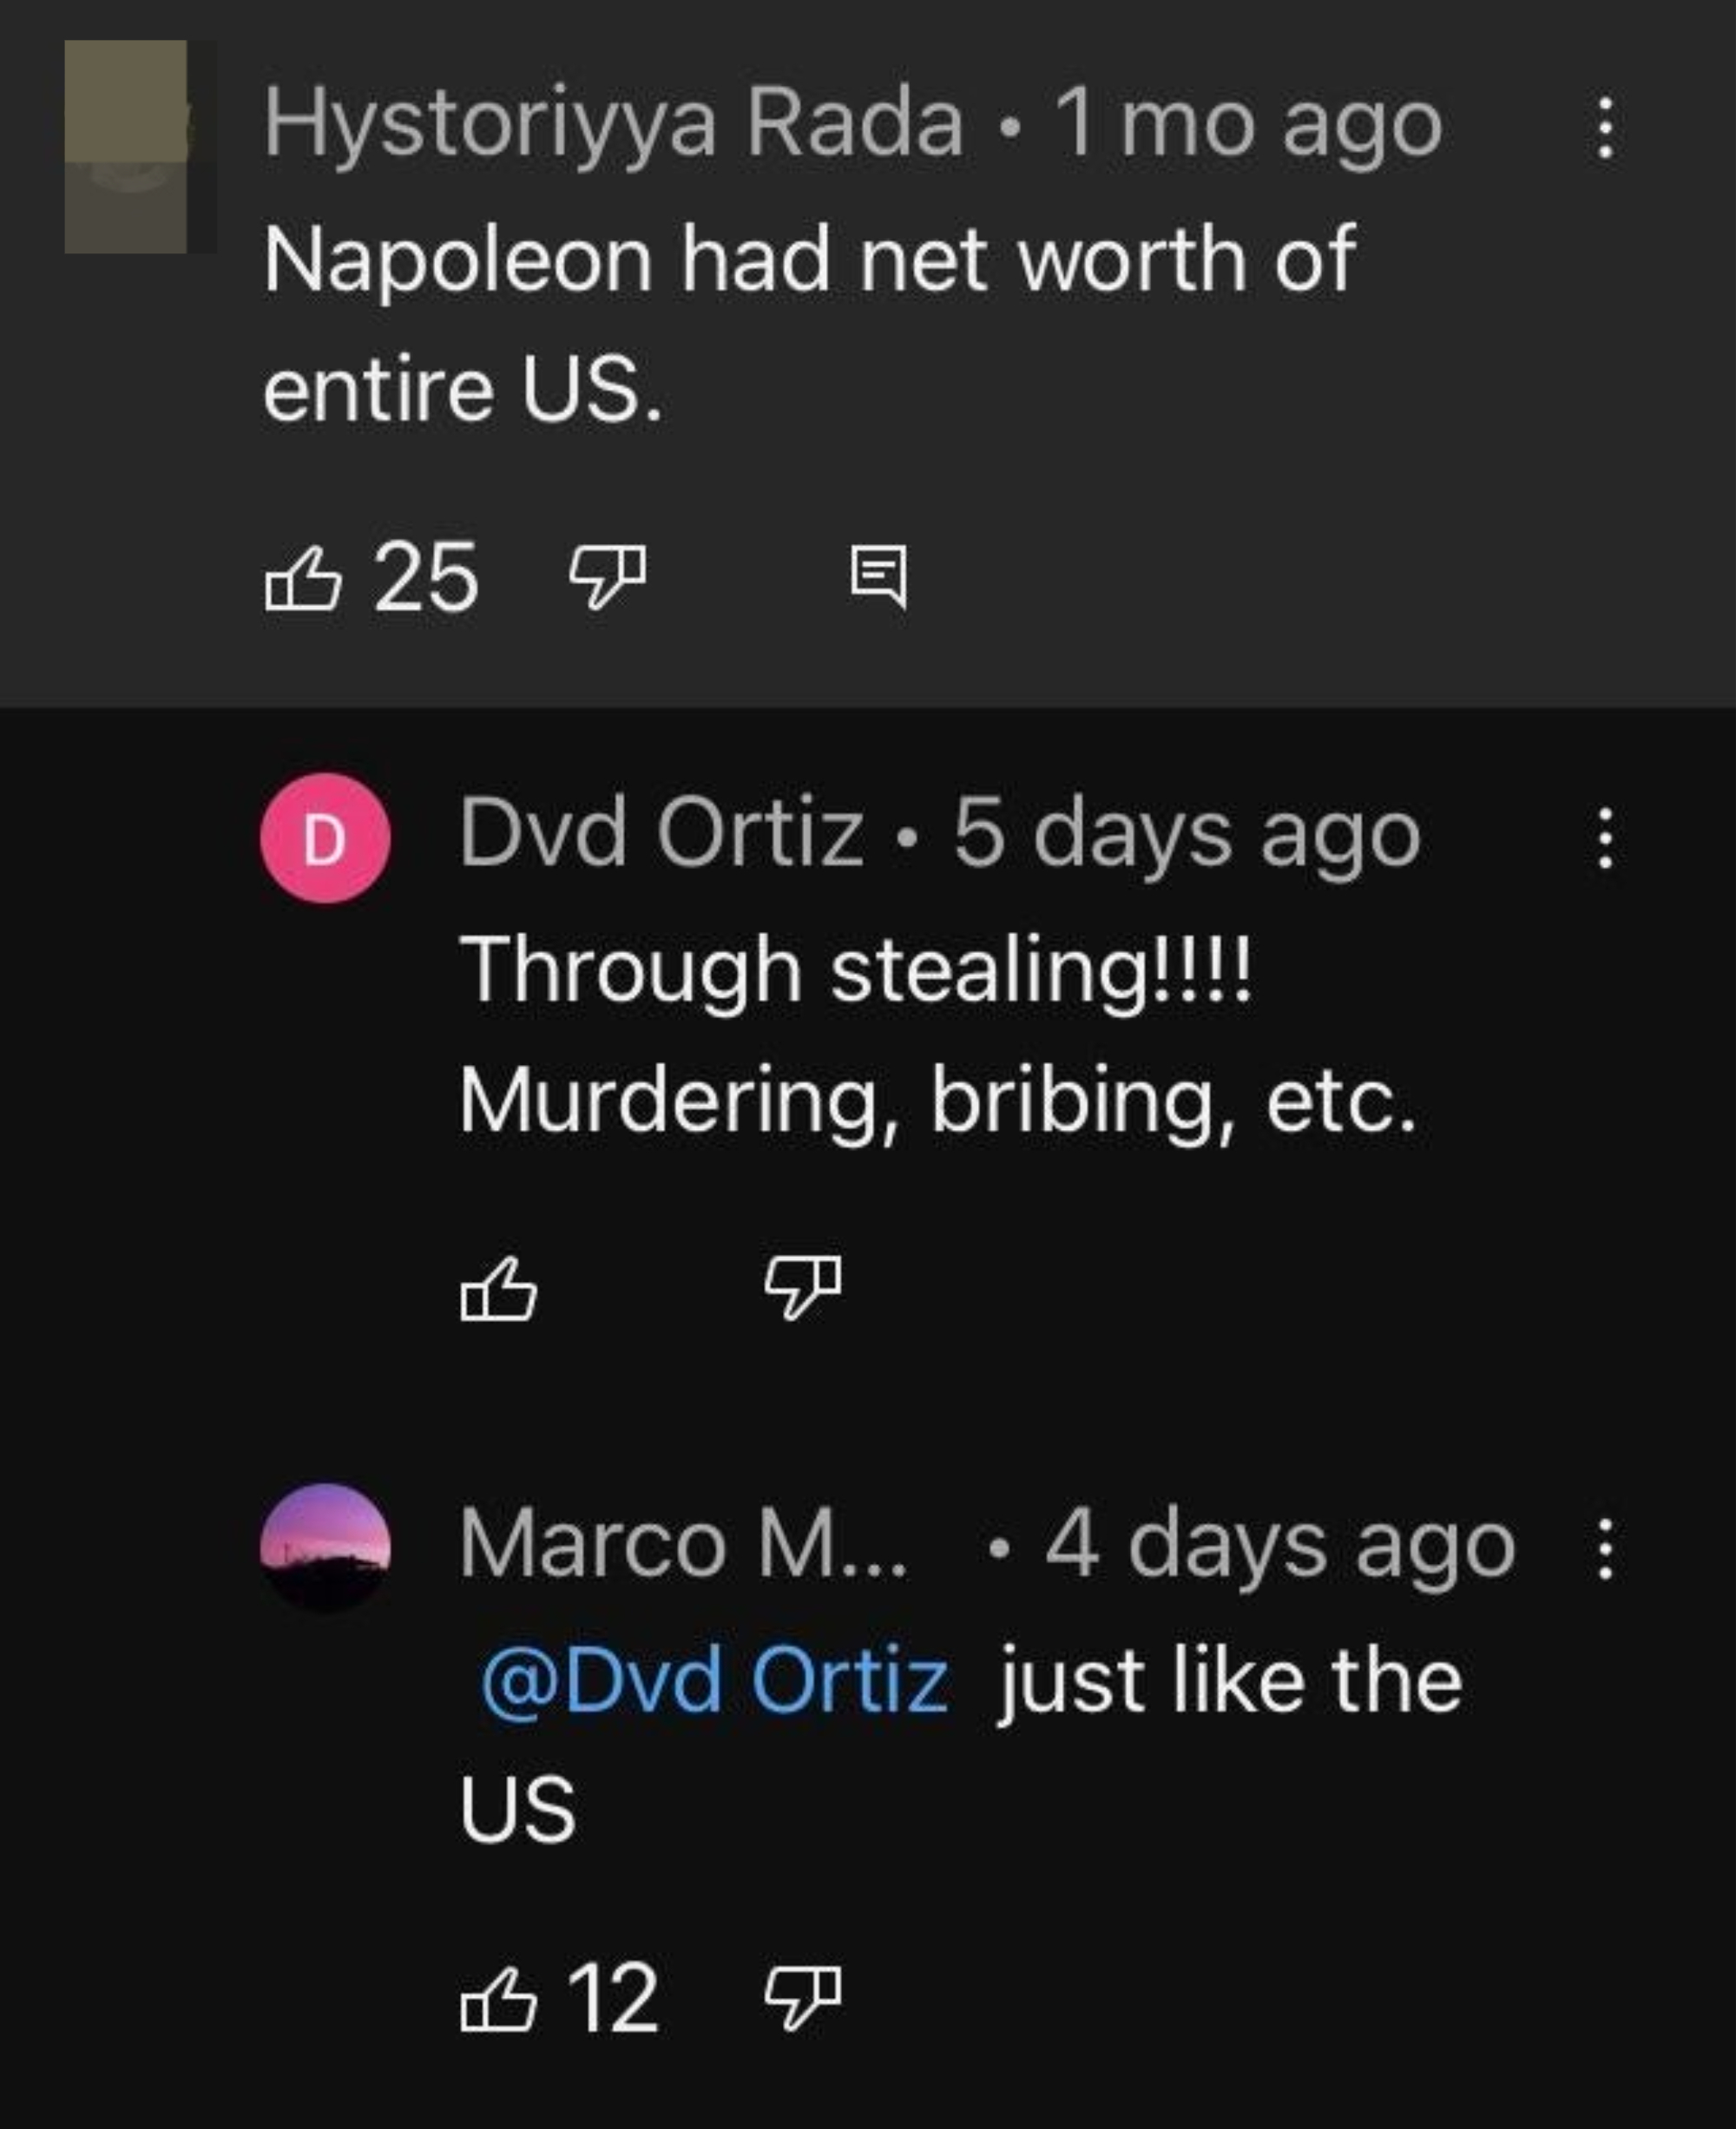 &quot;Napoleon had net worth of entire US,&quot; &quot;Through stealing!!! Murdering, bribing, etc.&quot; &quot;just like the US&quot;